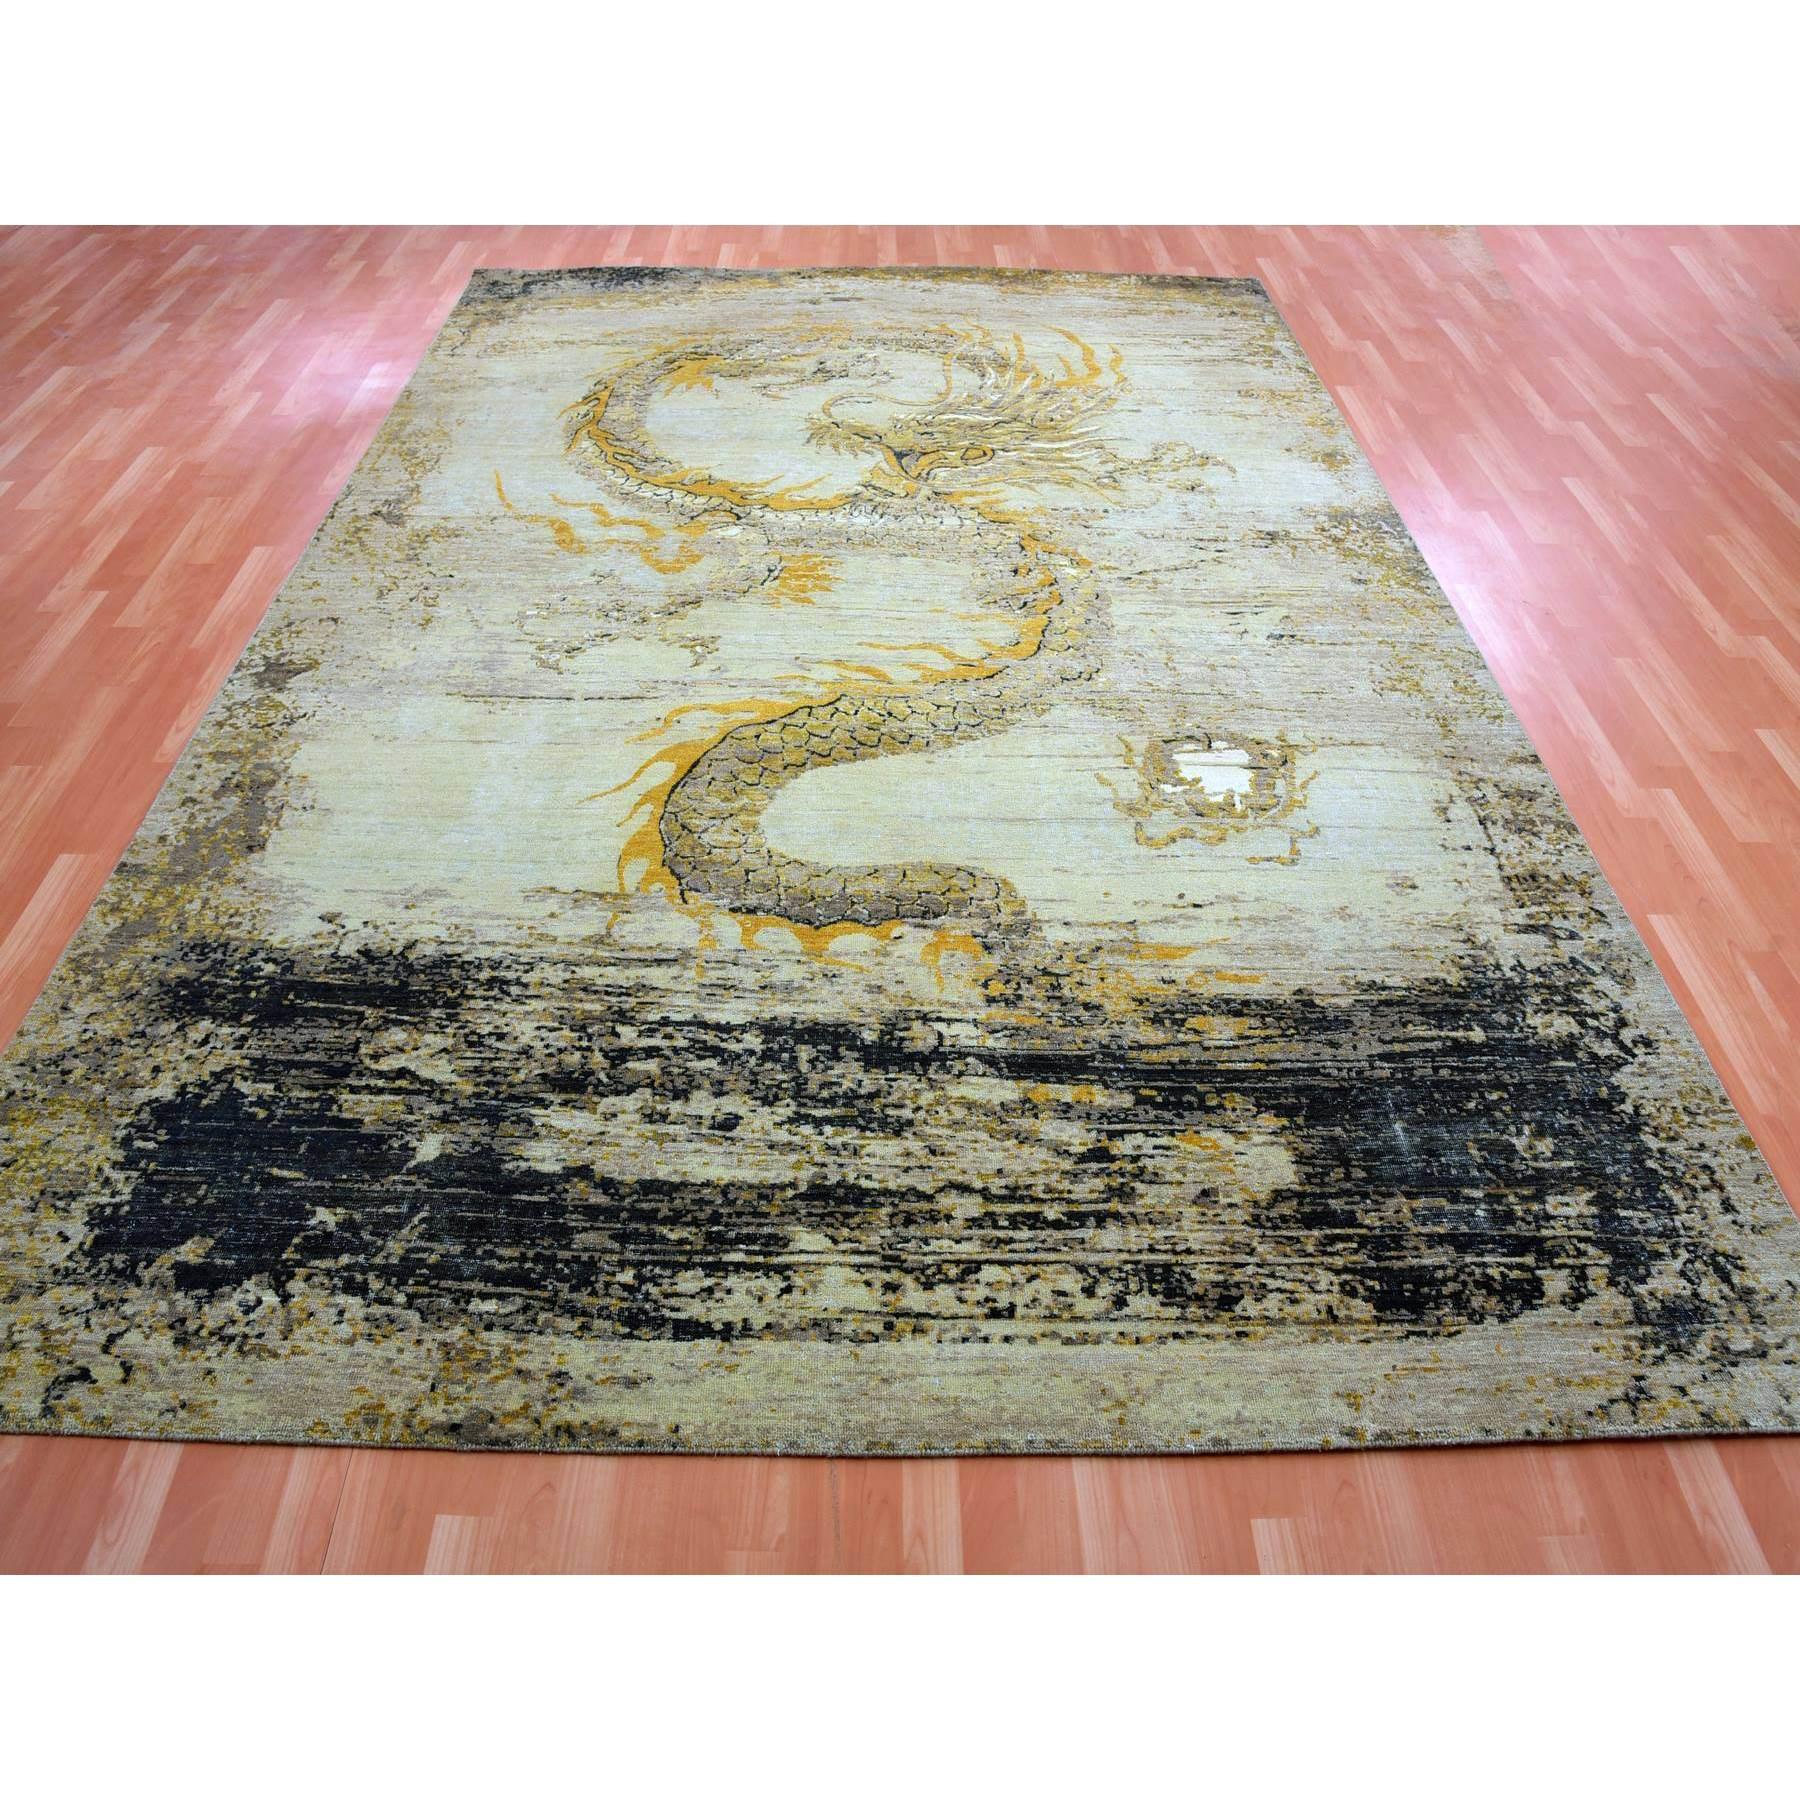 Medieval Beige Antique Chinese Inspired Dragon Design Pure Wool Hand Knotted Rug 9'x12'1